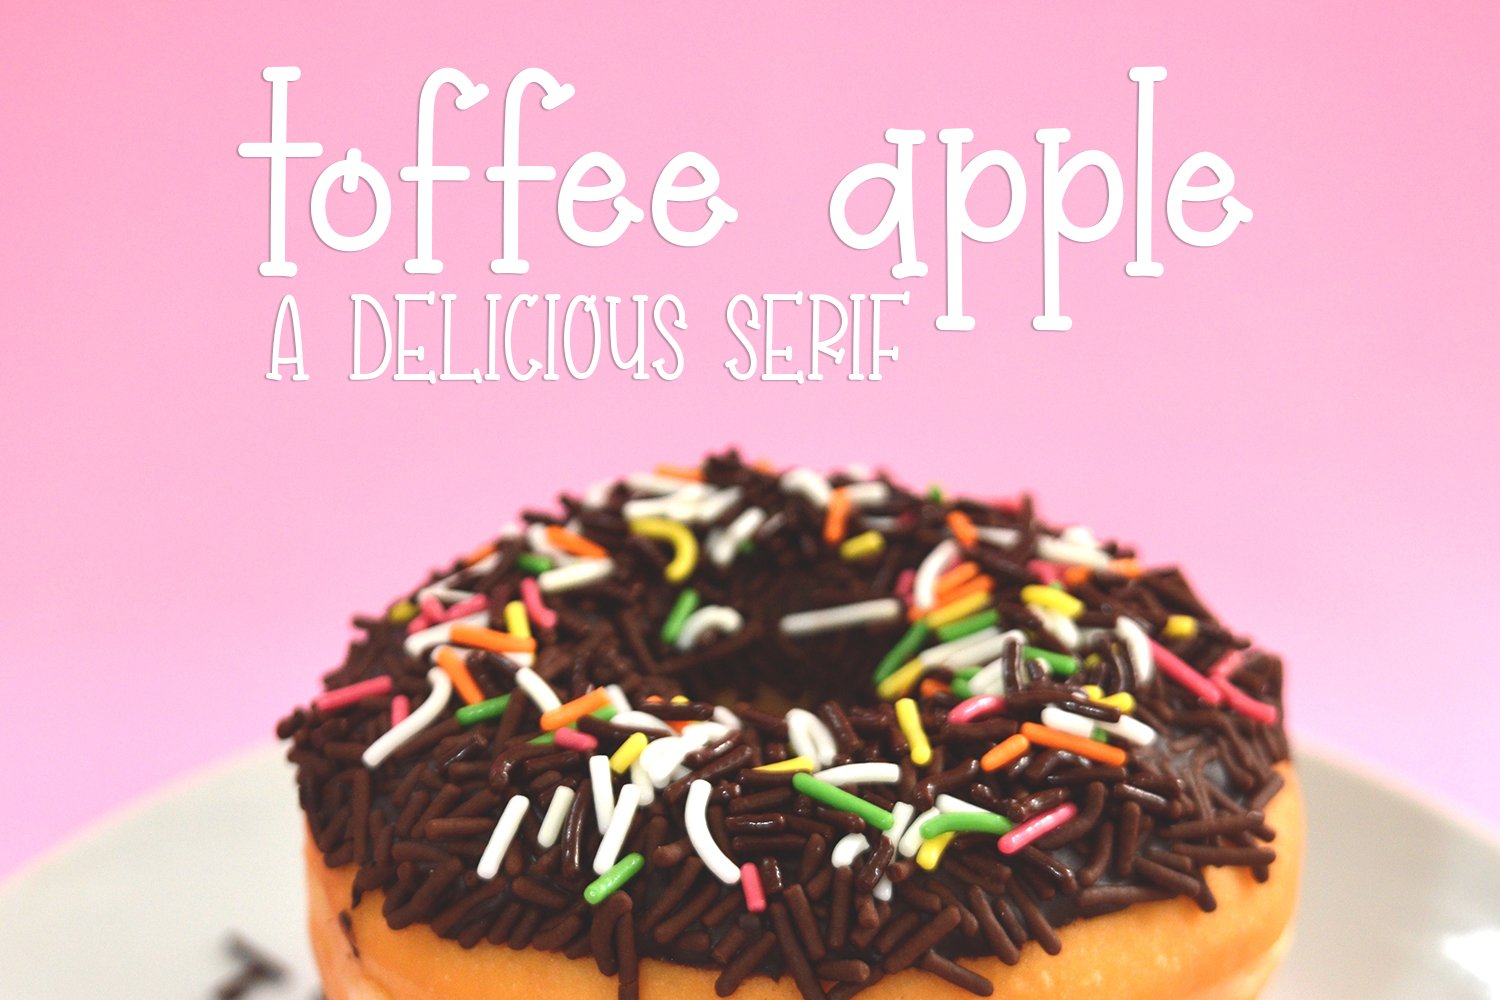 Toffee Apple cover image.